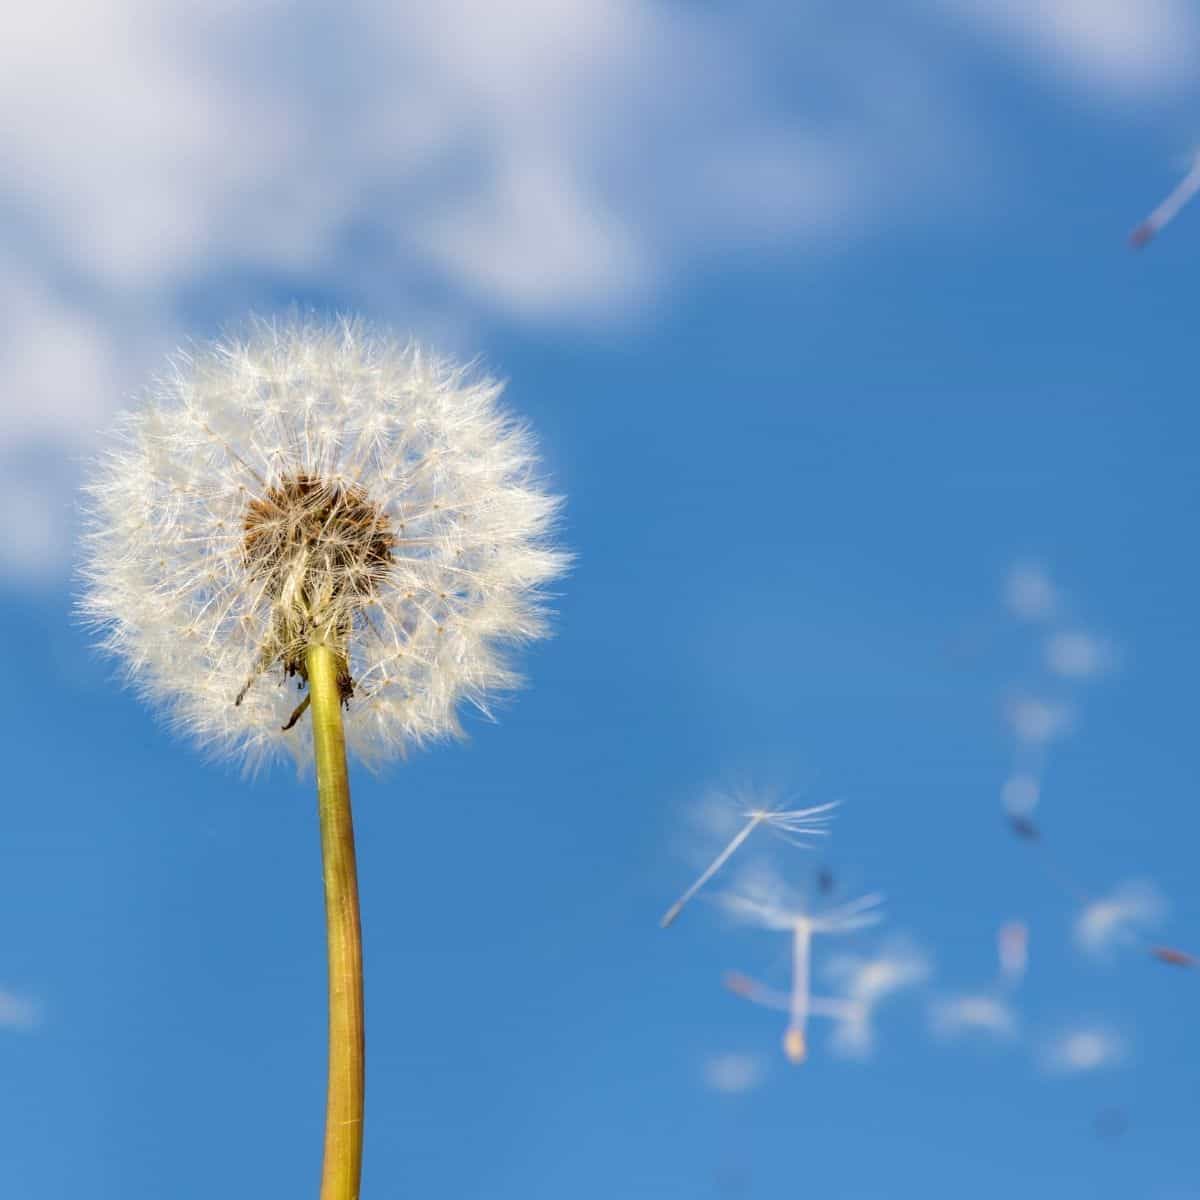 A seed filled dandelion in front of a blue sky.